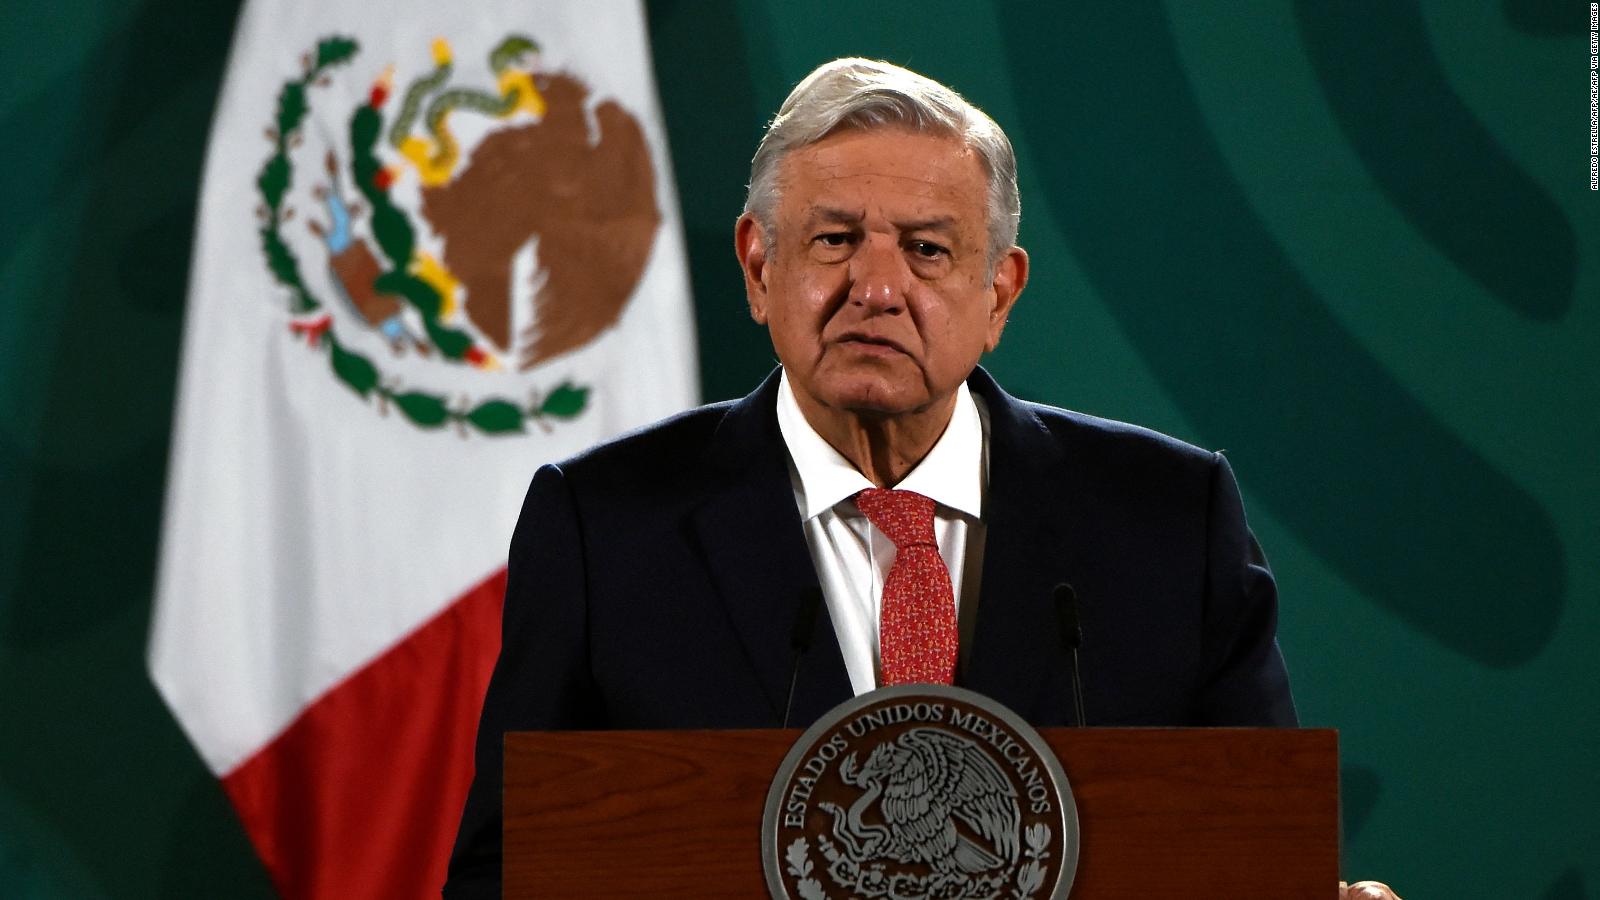 López Obrador underwent cardiac catheterization and "is in perfect health," according to the minister. thumbnail